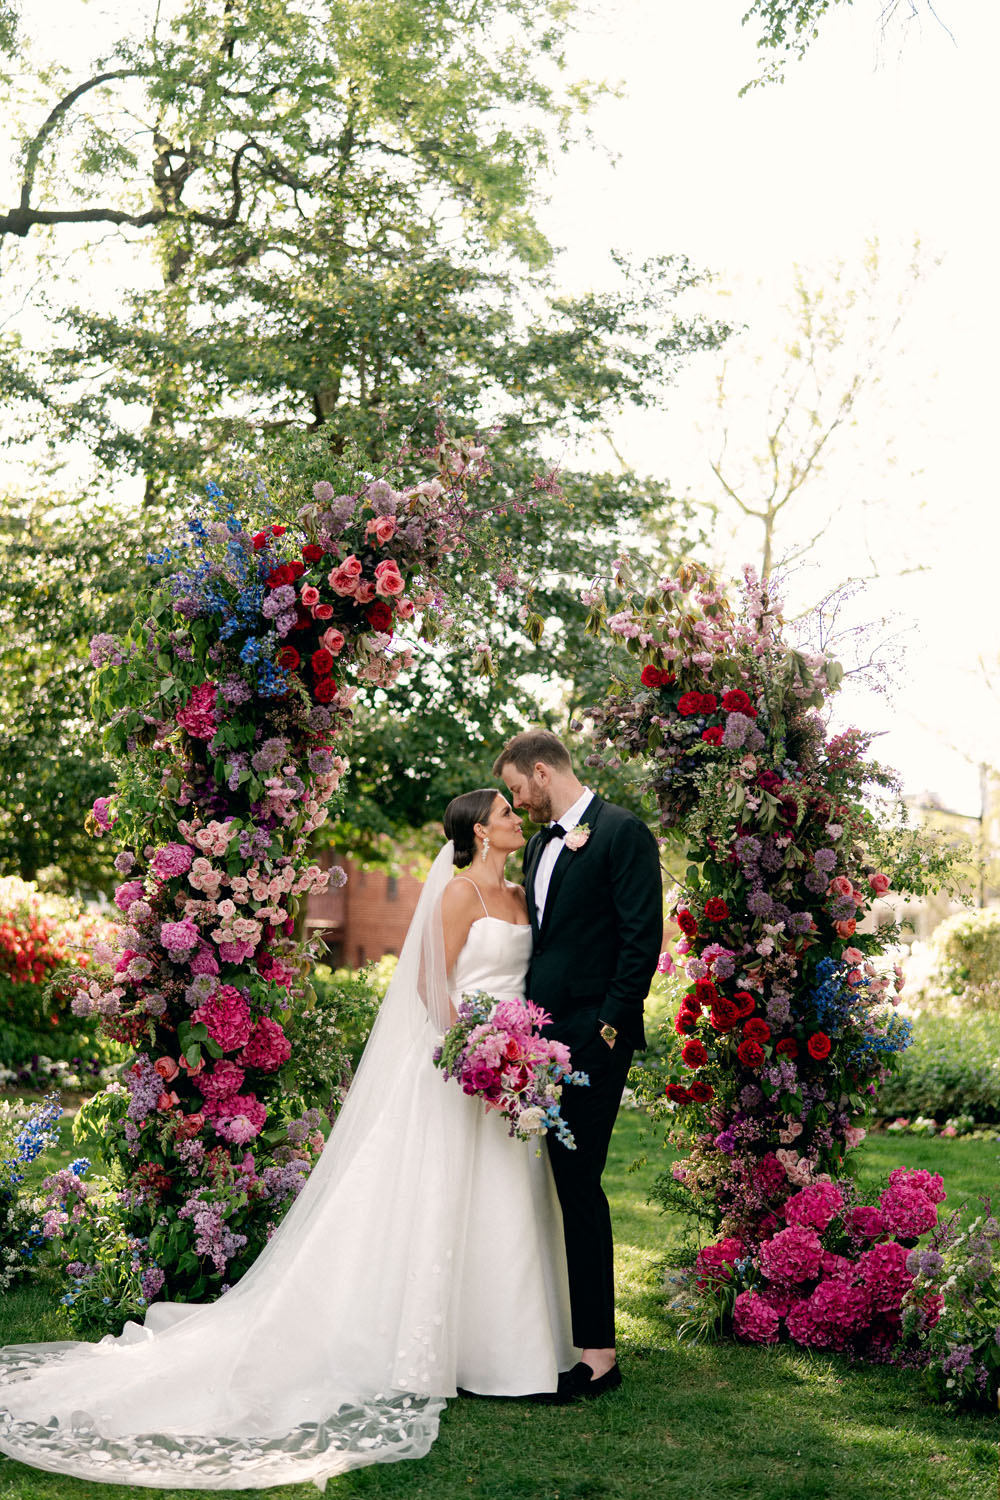 Romantic maximalist wedding with gorgeous floral arch